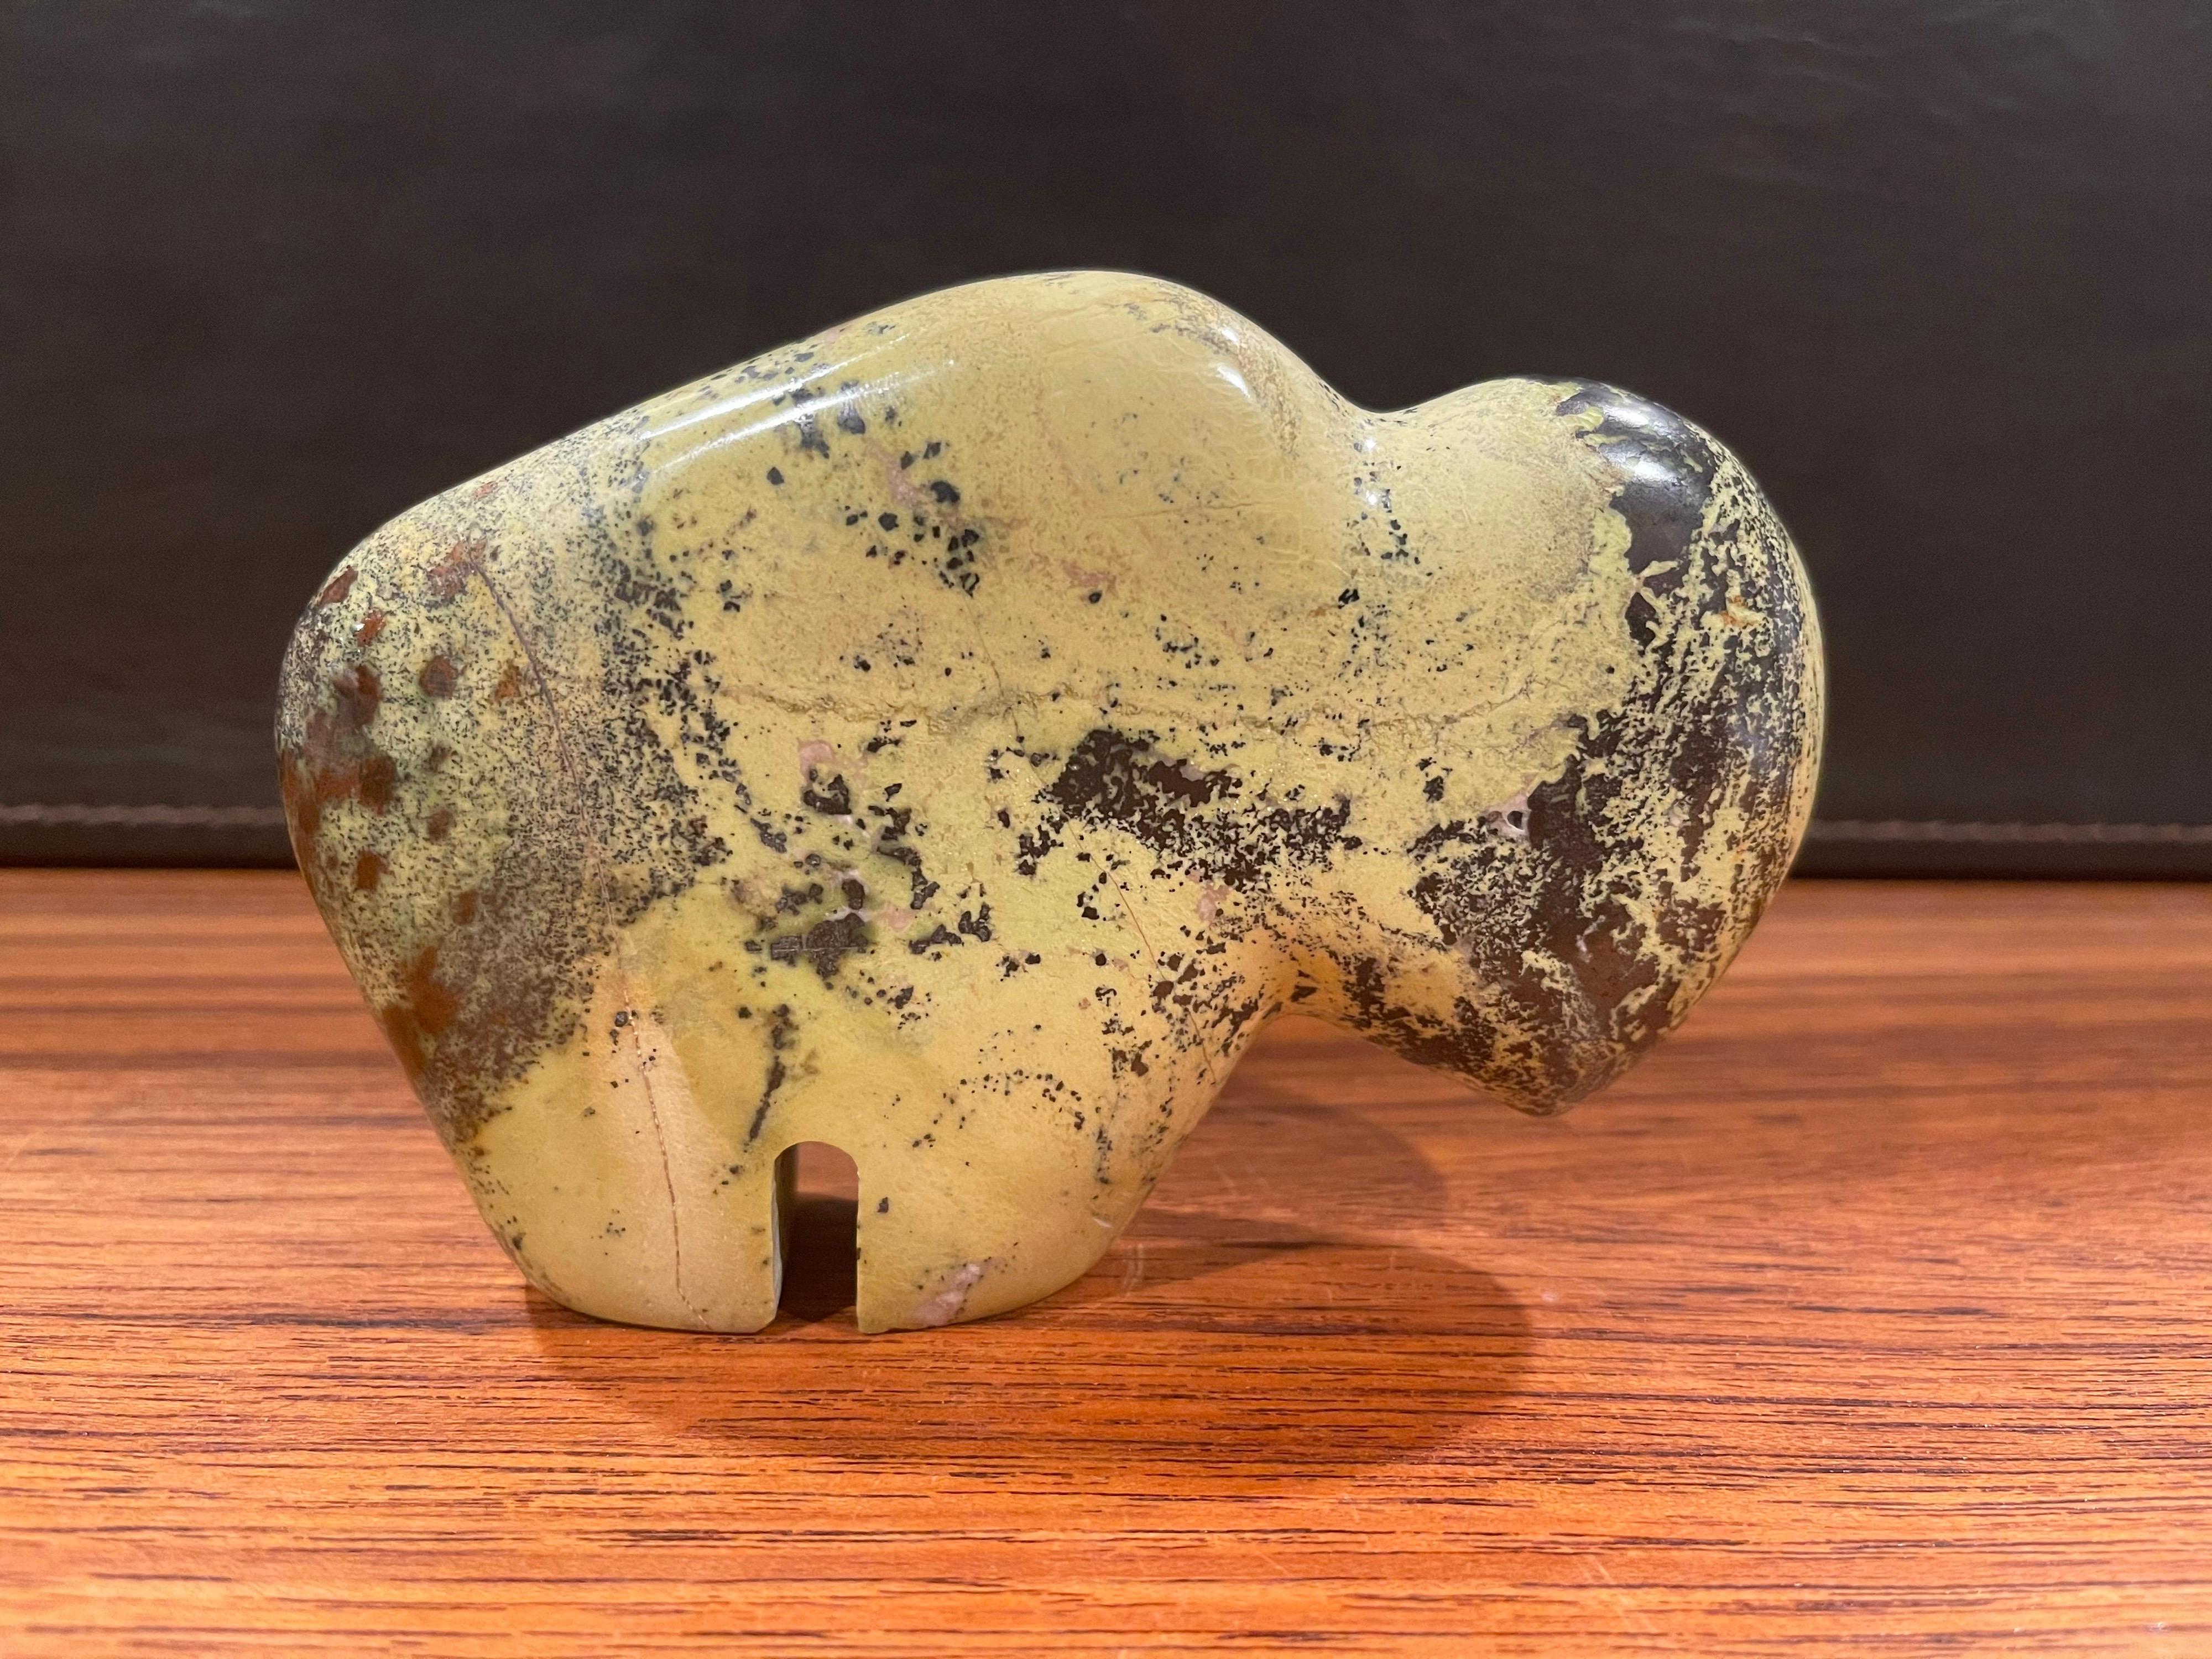 Chamelon marble buffalo sculpture / paperweight, circa 1990s. The piece is in very good condition with no chips or cracks and measures 4.5